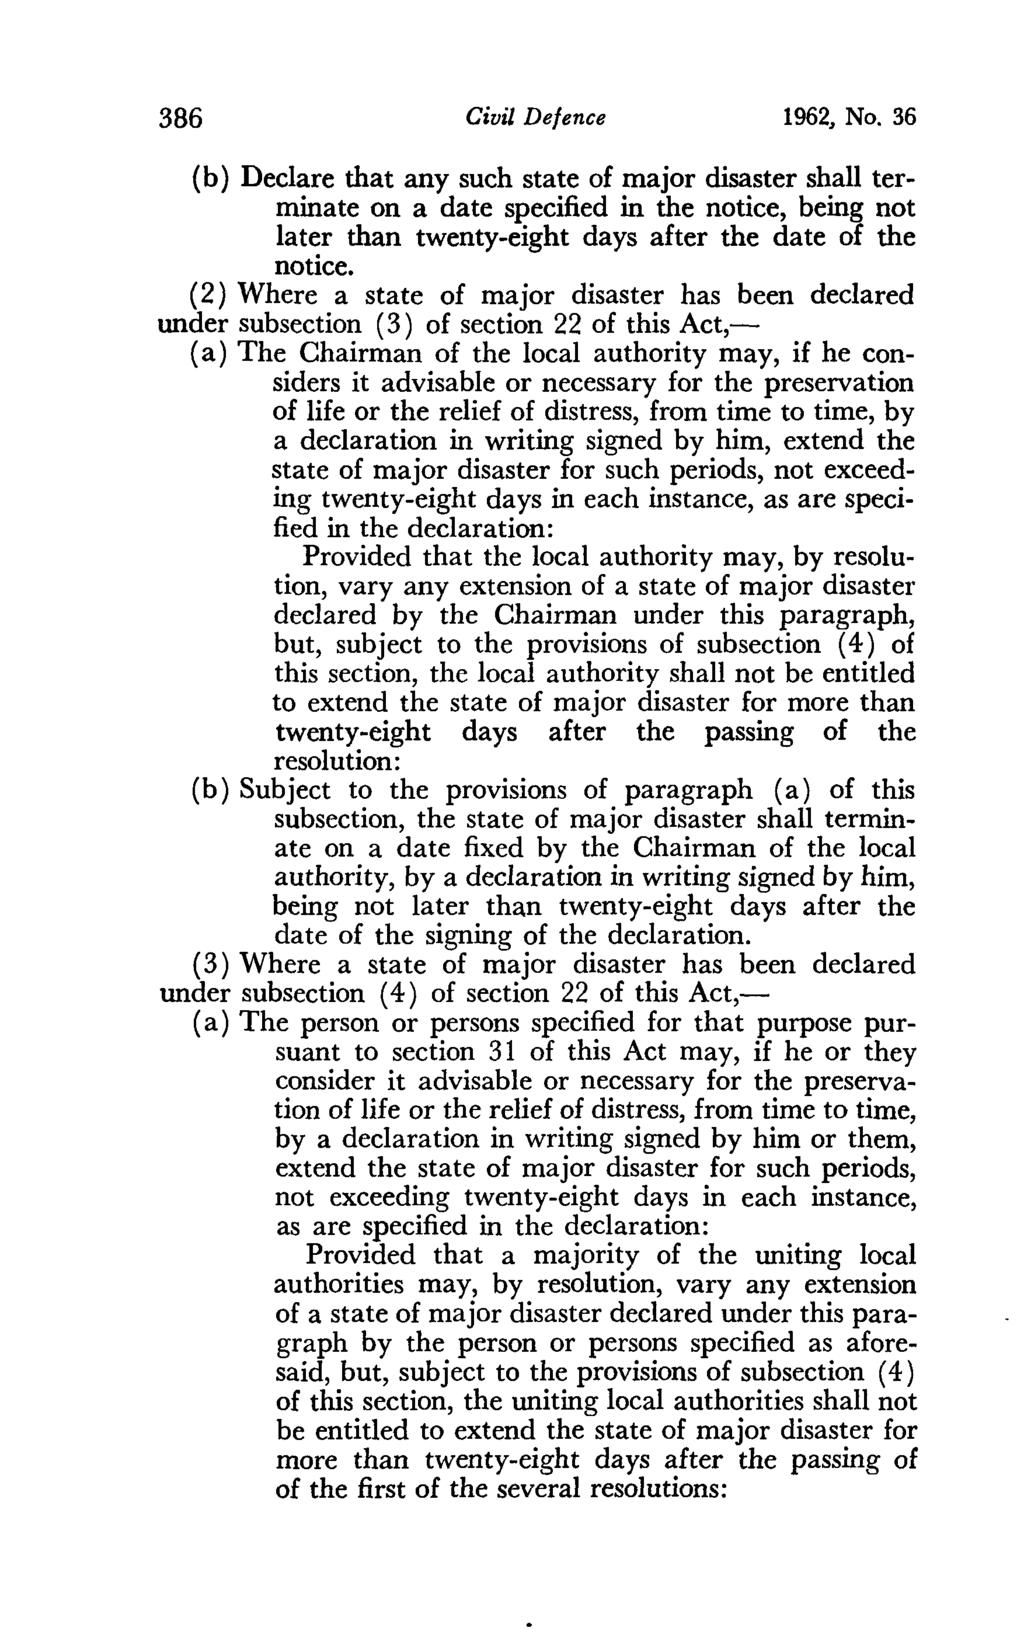 386 Civil Defence 1962, No. 36 (b) Declare that any such state of major disaster shall terminate on a date specified in the notice, being not later than twenty-eight days after the date of the notice.